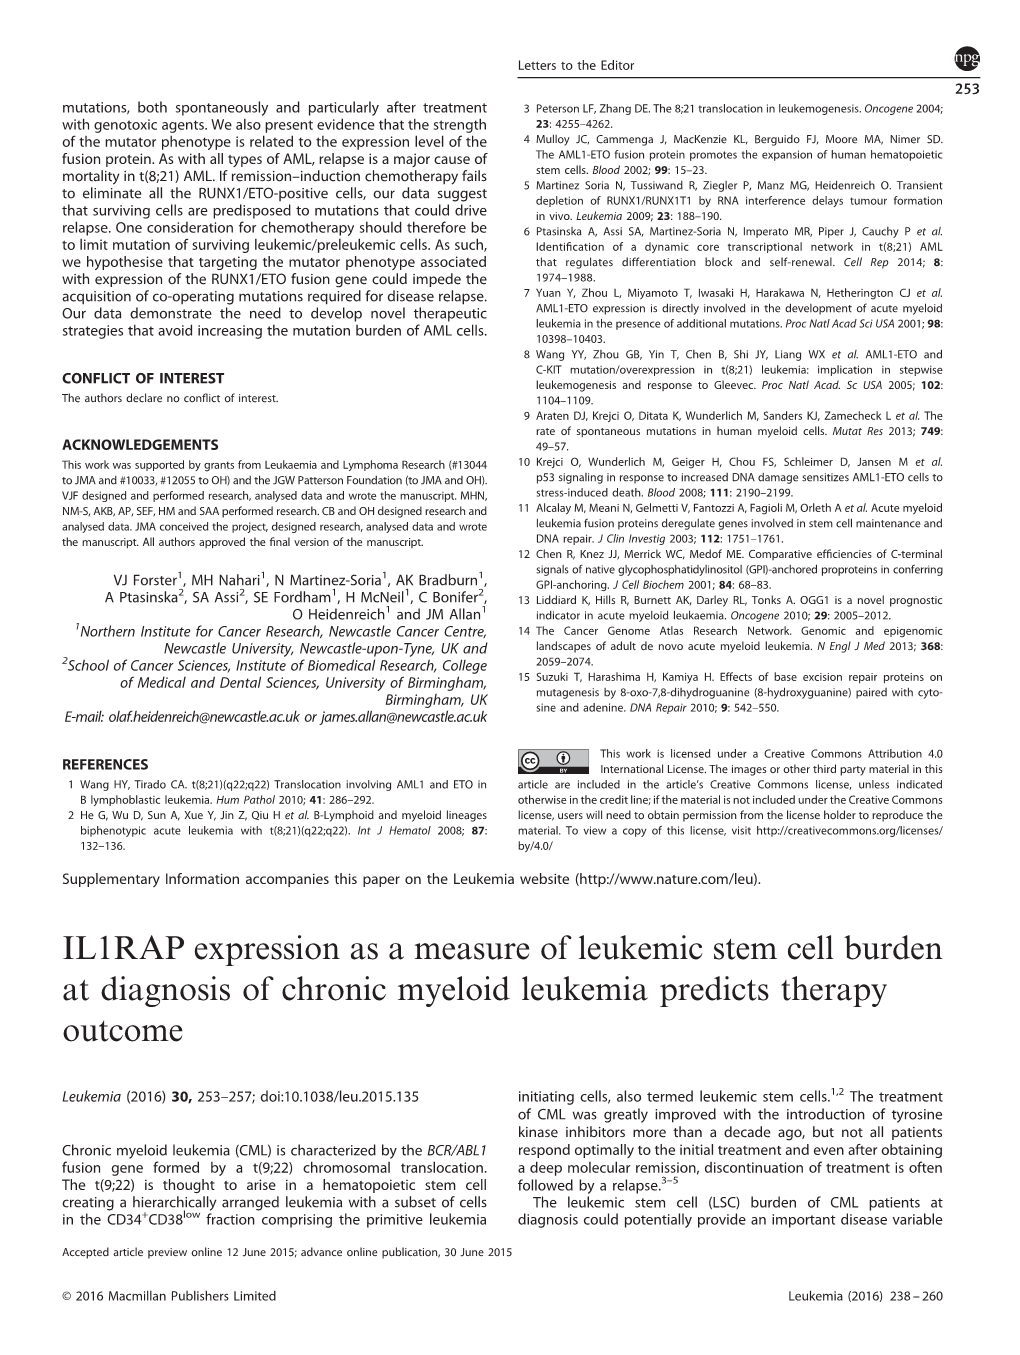 IL1RAP Expression As a Measure of Leukemic Stem Cell Burden at Diagnosis of Chronic Myeloid Leukemia Predicts Therapy Outcome